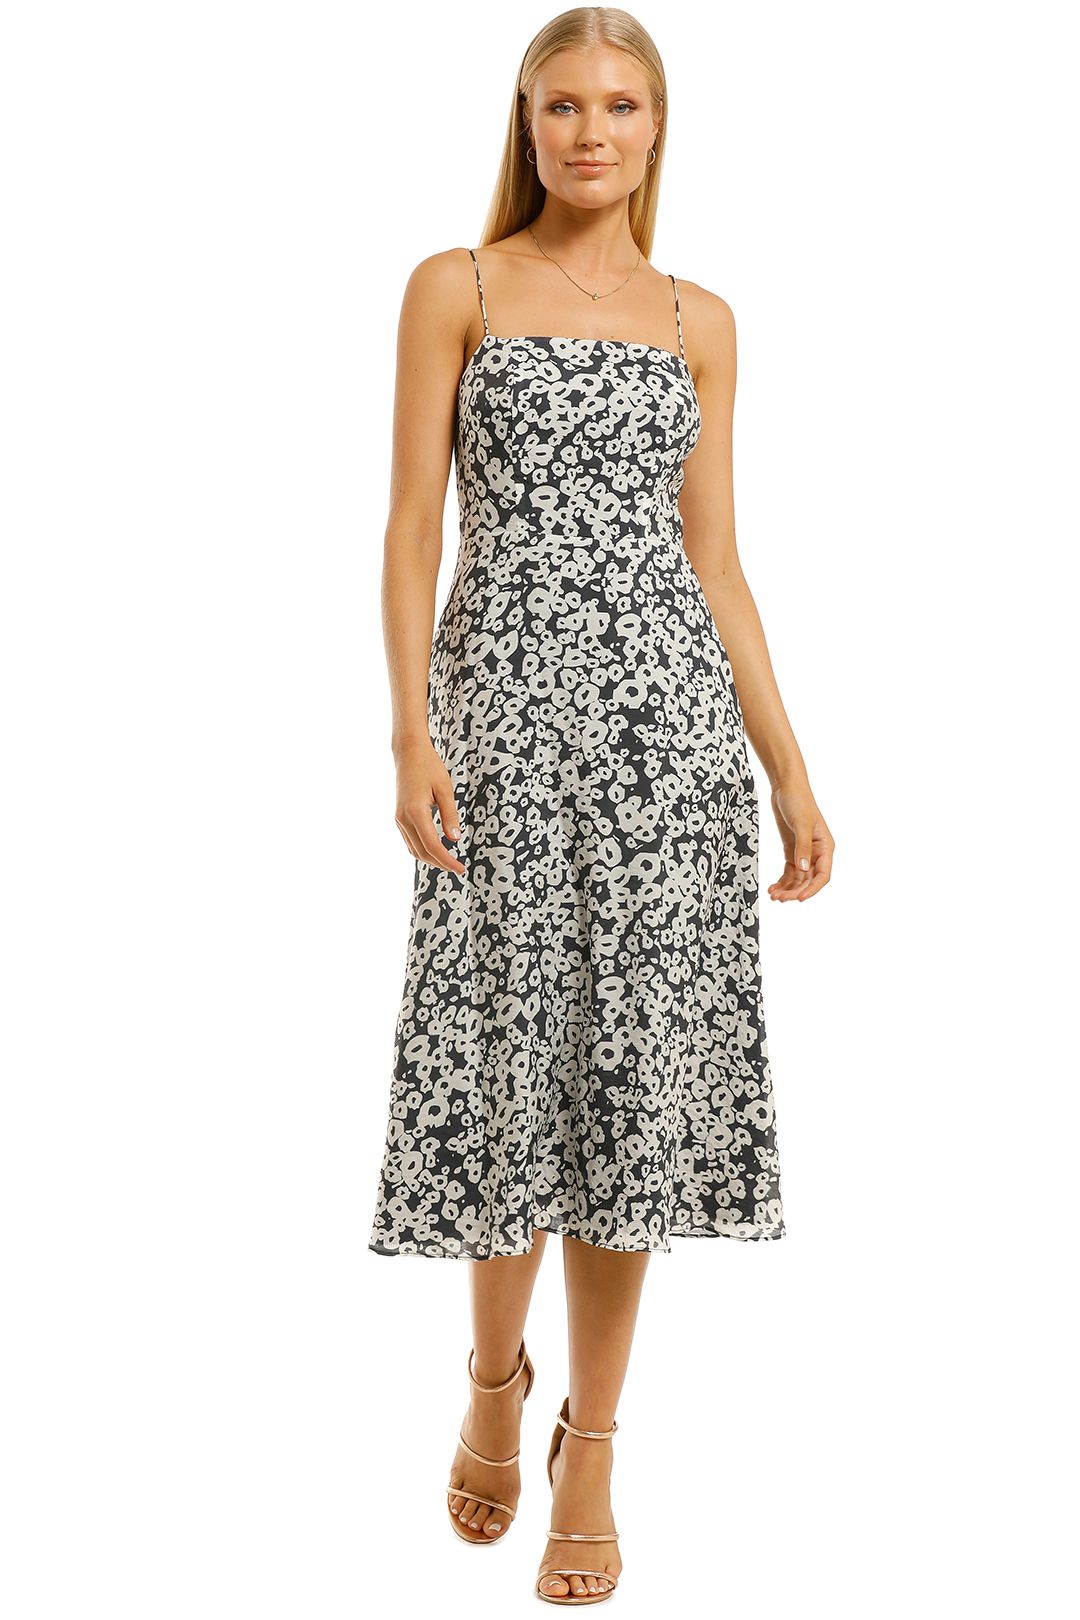 The-East-Order-Tait-Midi-Dress-Arty-Front